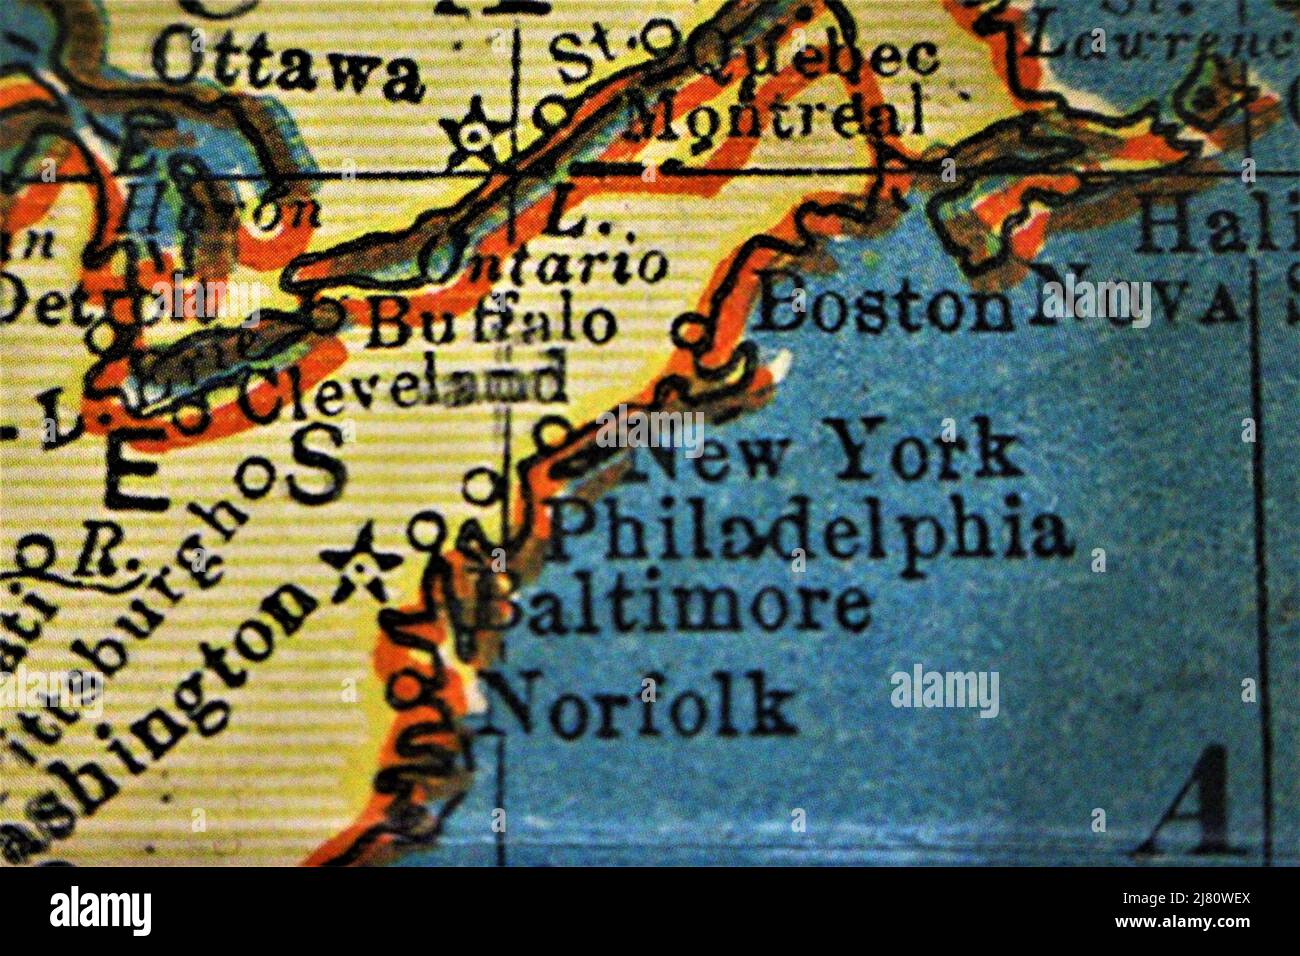 Old map of the north eastern seaboard in the USA focused on and highlighting Boston, New York, Philadelphia Stock Photo